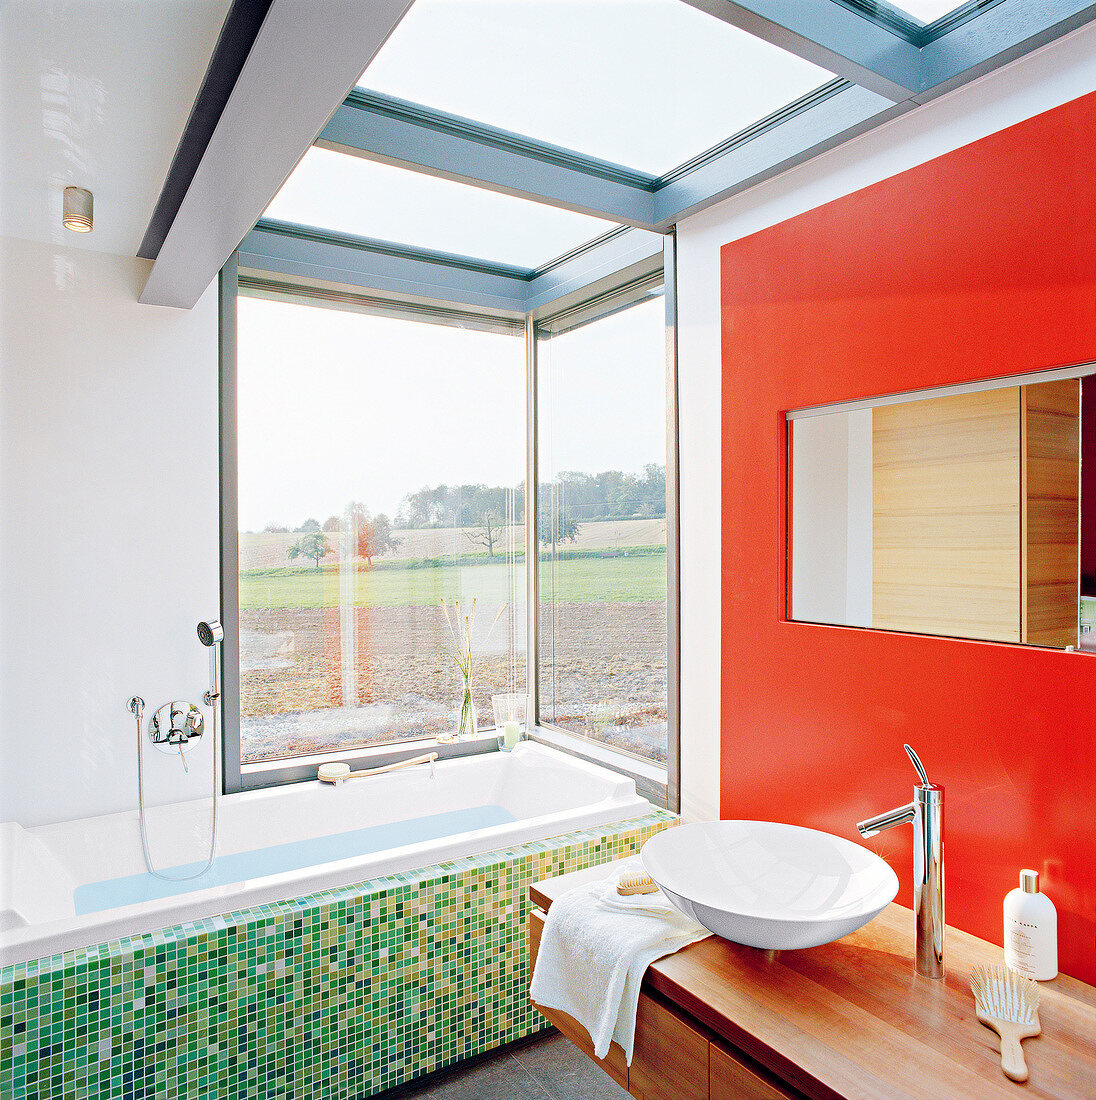 Luxury bathroom with glass roof and basin in front of orange wall